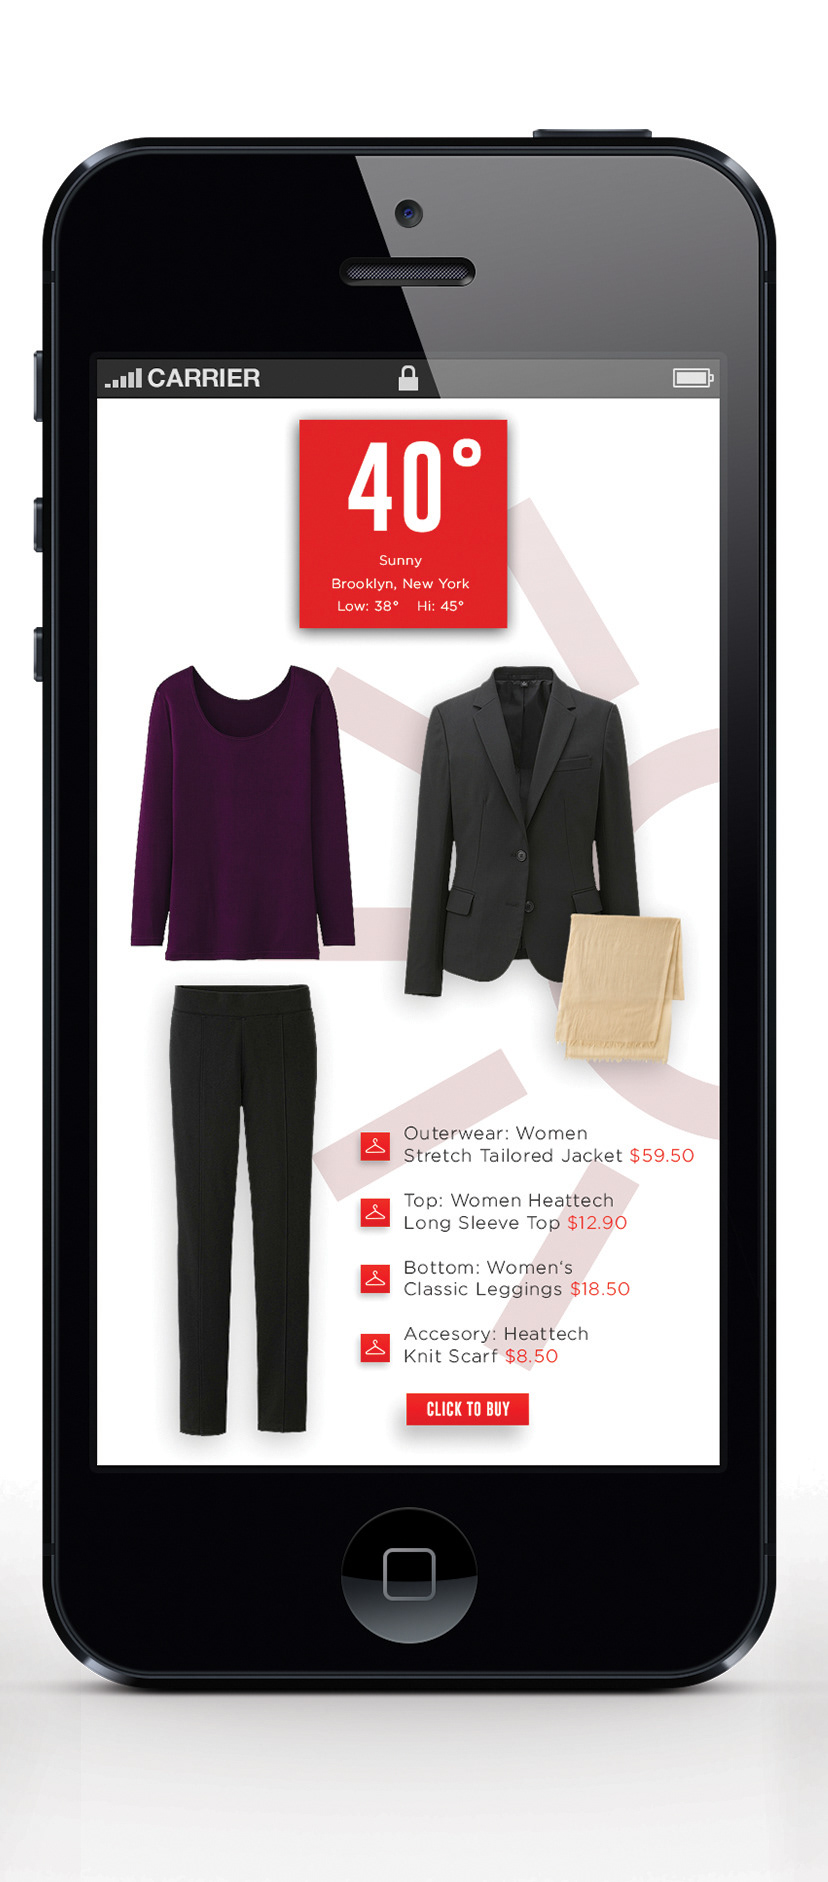 Appdesign uniqlo HEATTECH Retail Clothing fitness